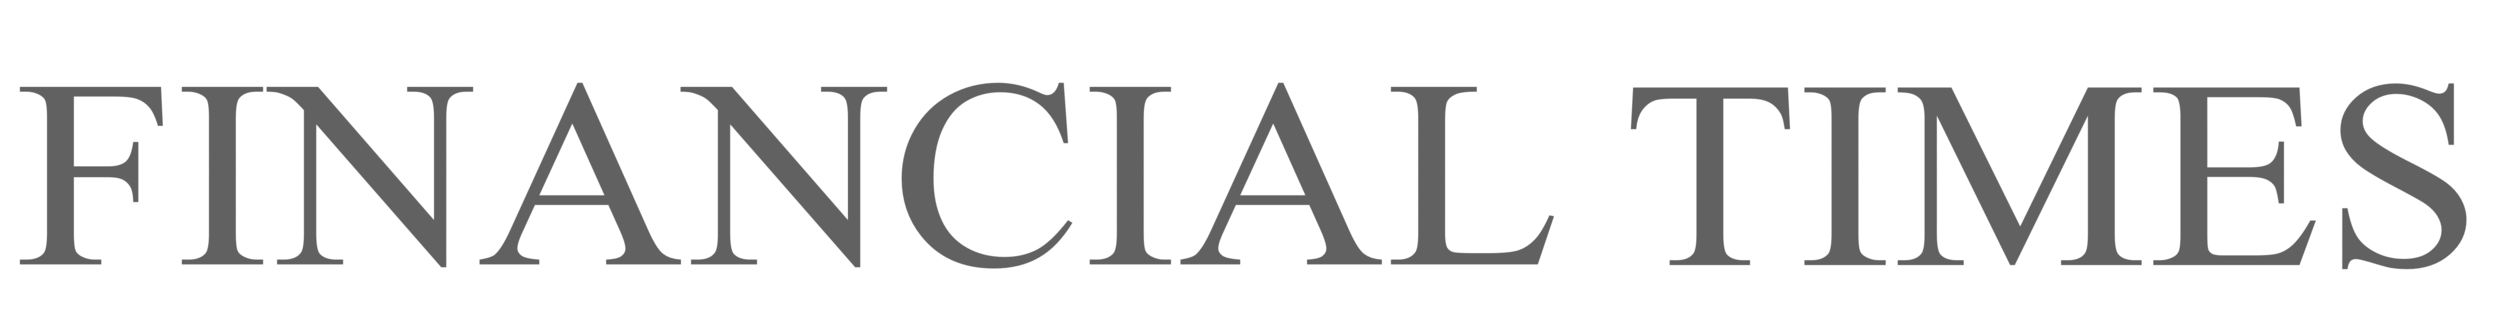 FT_The_Financial_Times_logo_wordmark.png